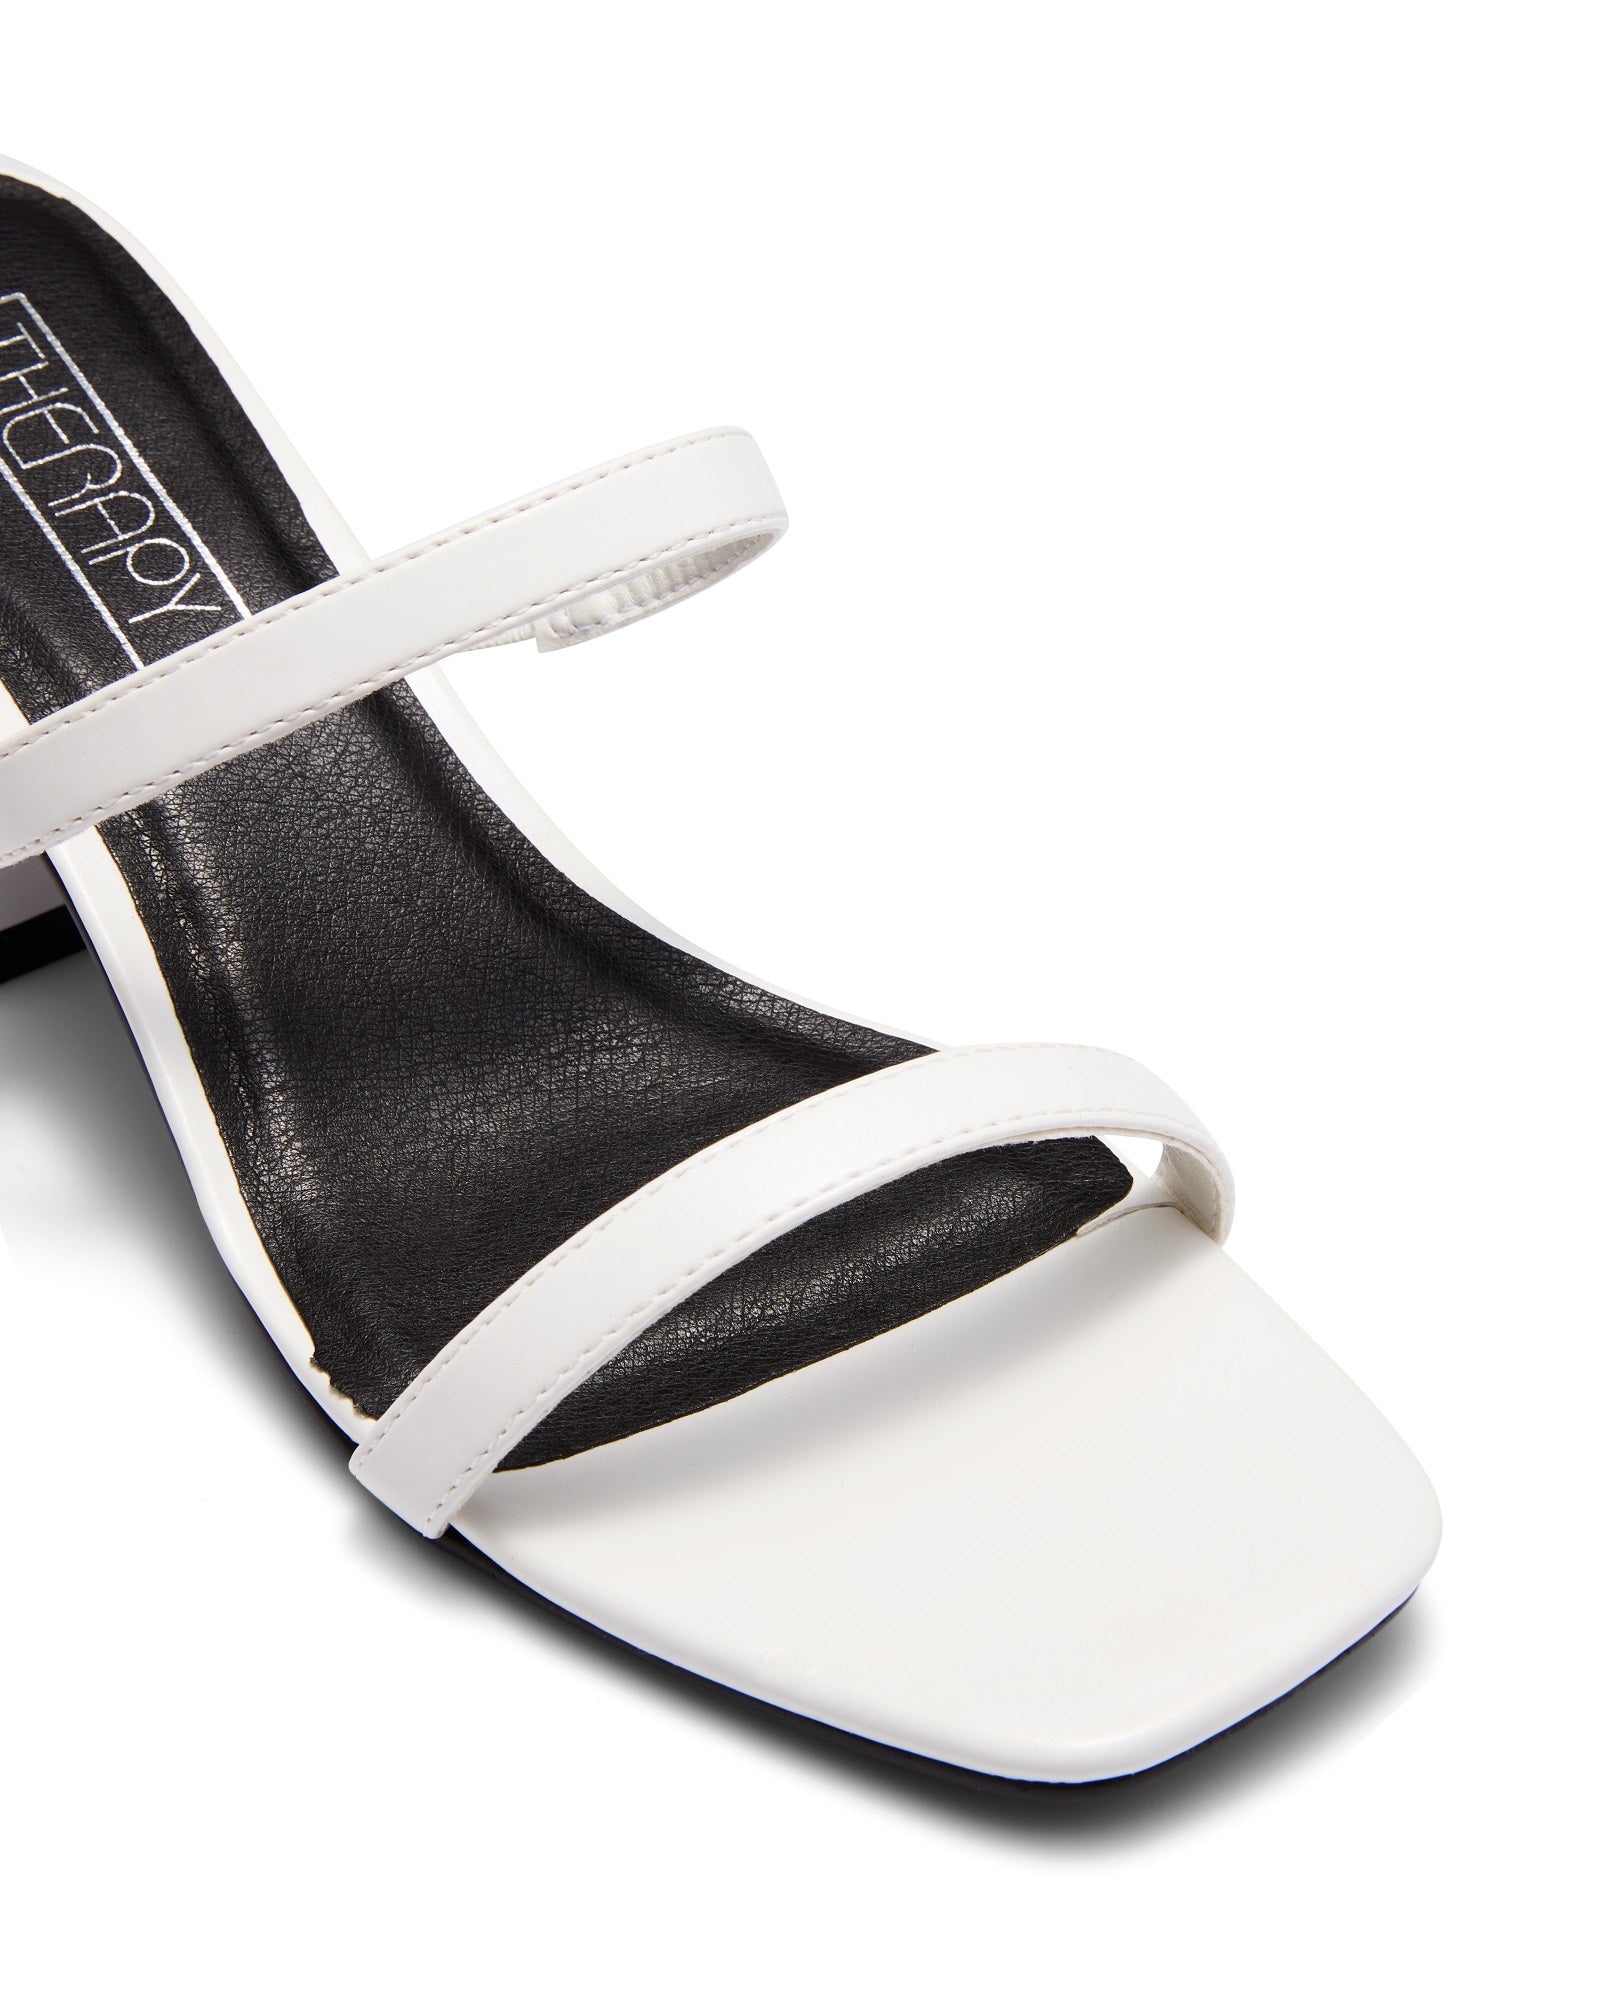 Therapy Shoes Goldie White | Women's Heels | Sandals | Mules 